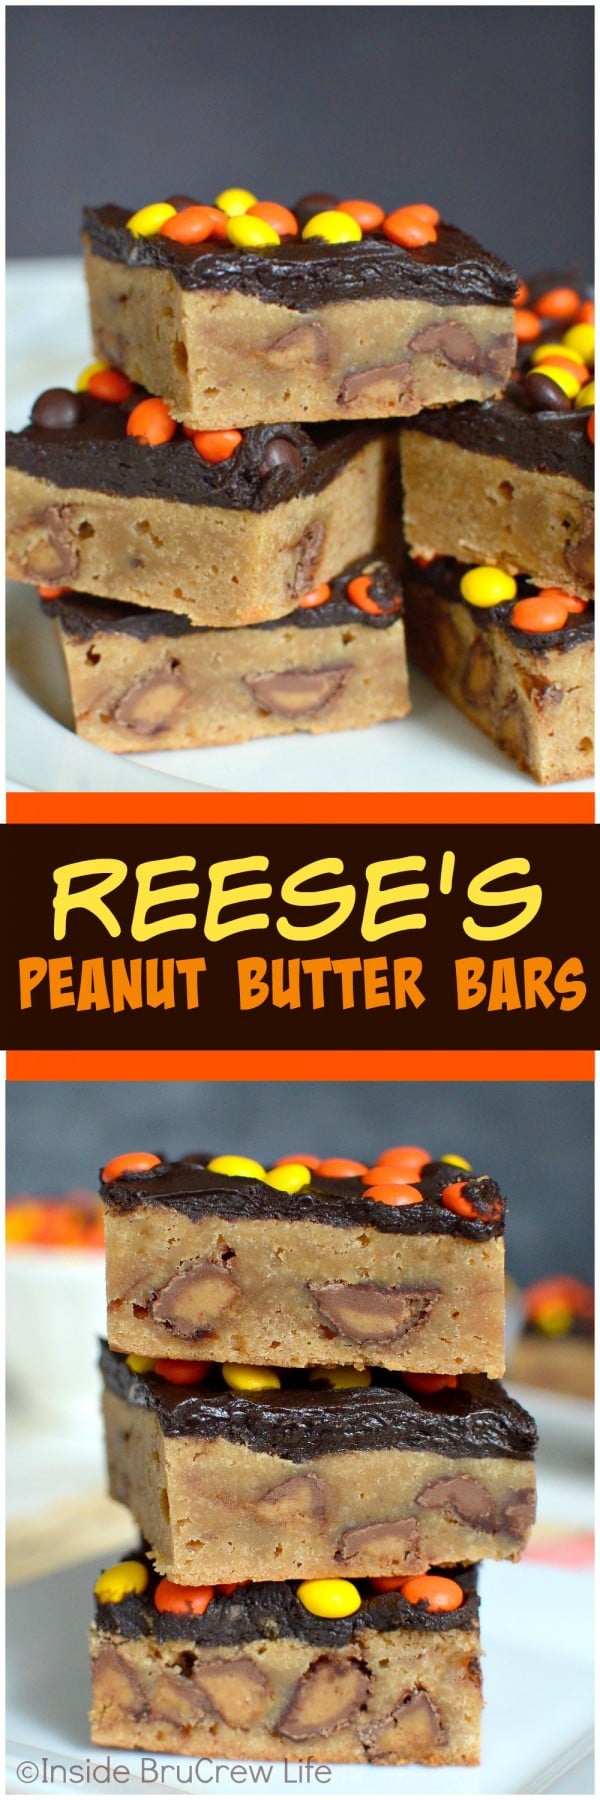 Reese's Peanut Butter Bars - these peanut butter brownies are loaded with Reese's candies and chocolate frosting. This dessert recipe will disappear in no time!